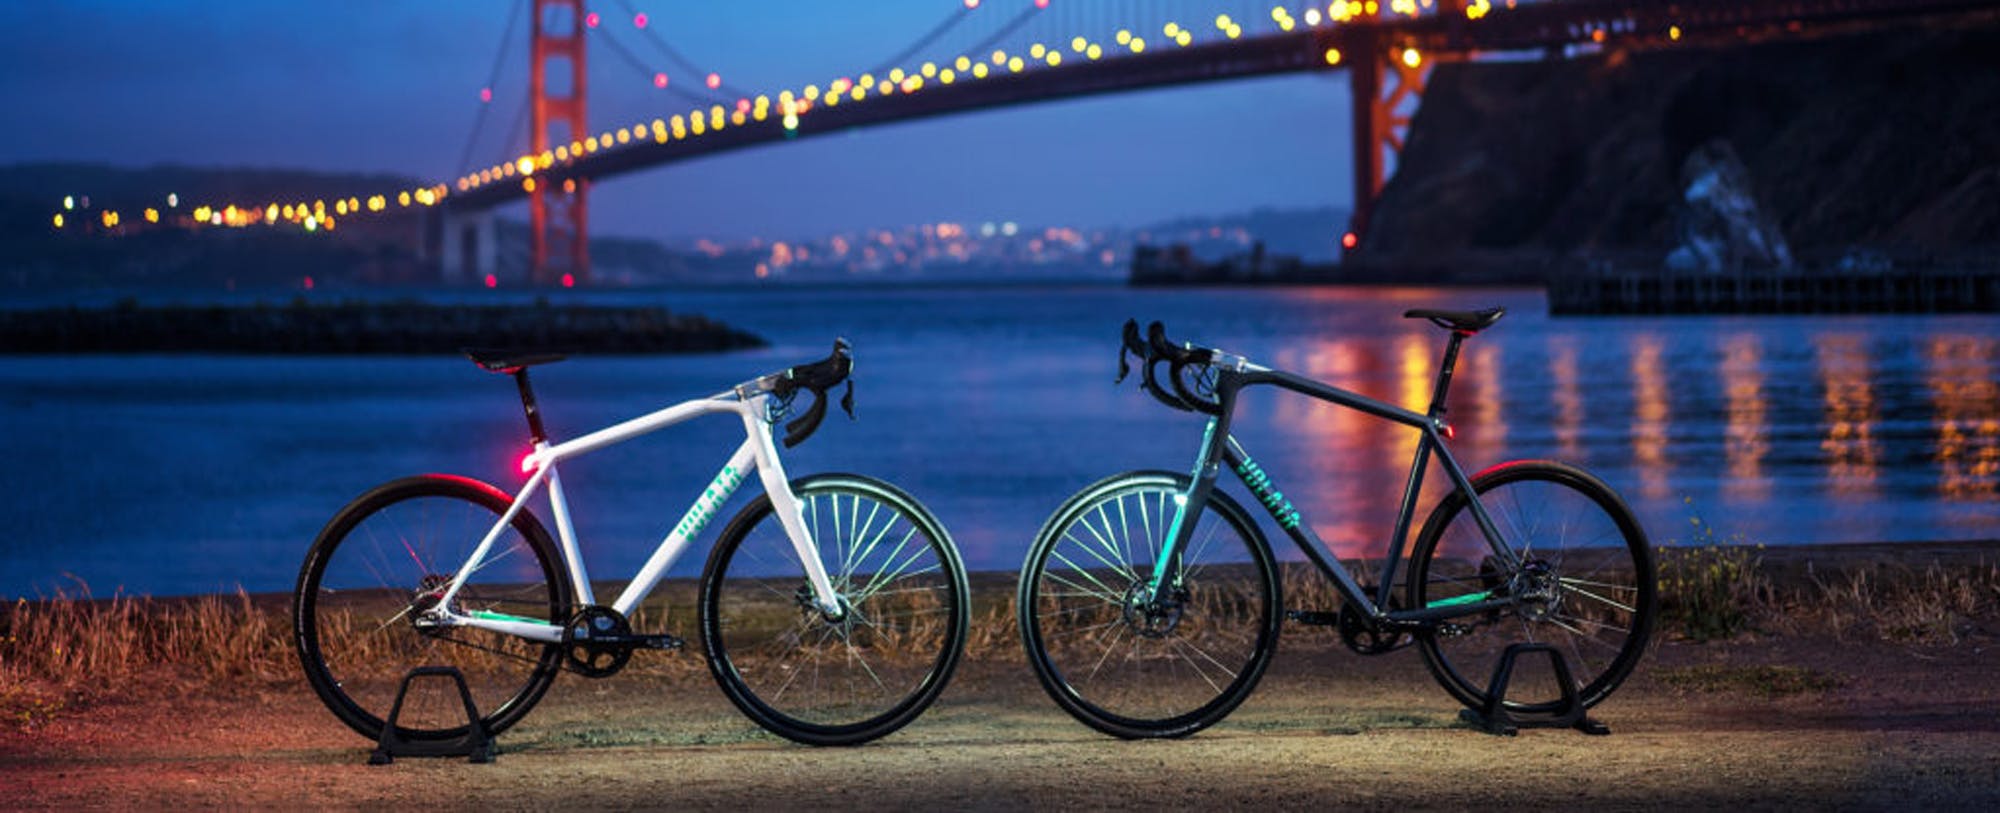 Pedaling is Watt Matters: Volata’s Bike Turns Innovation into Practical Riding